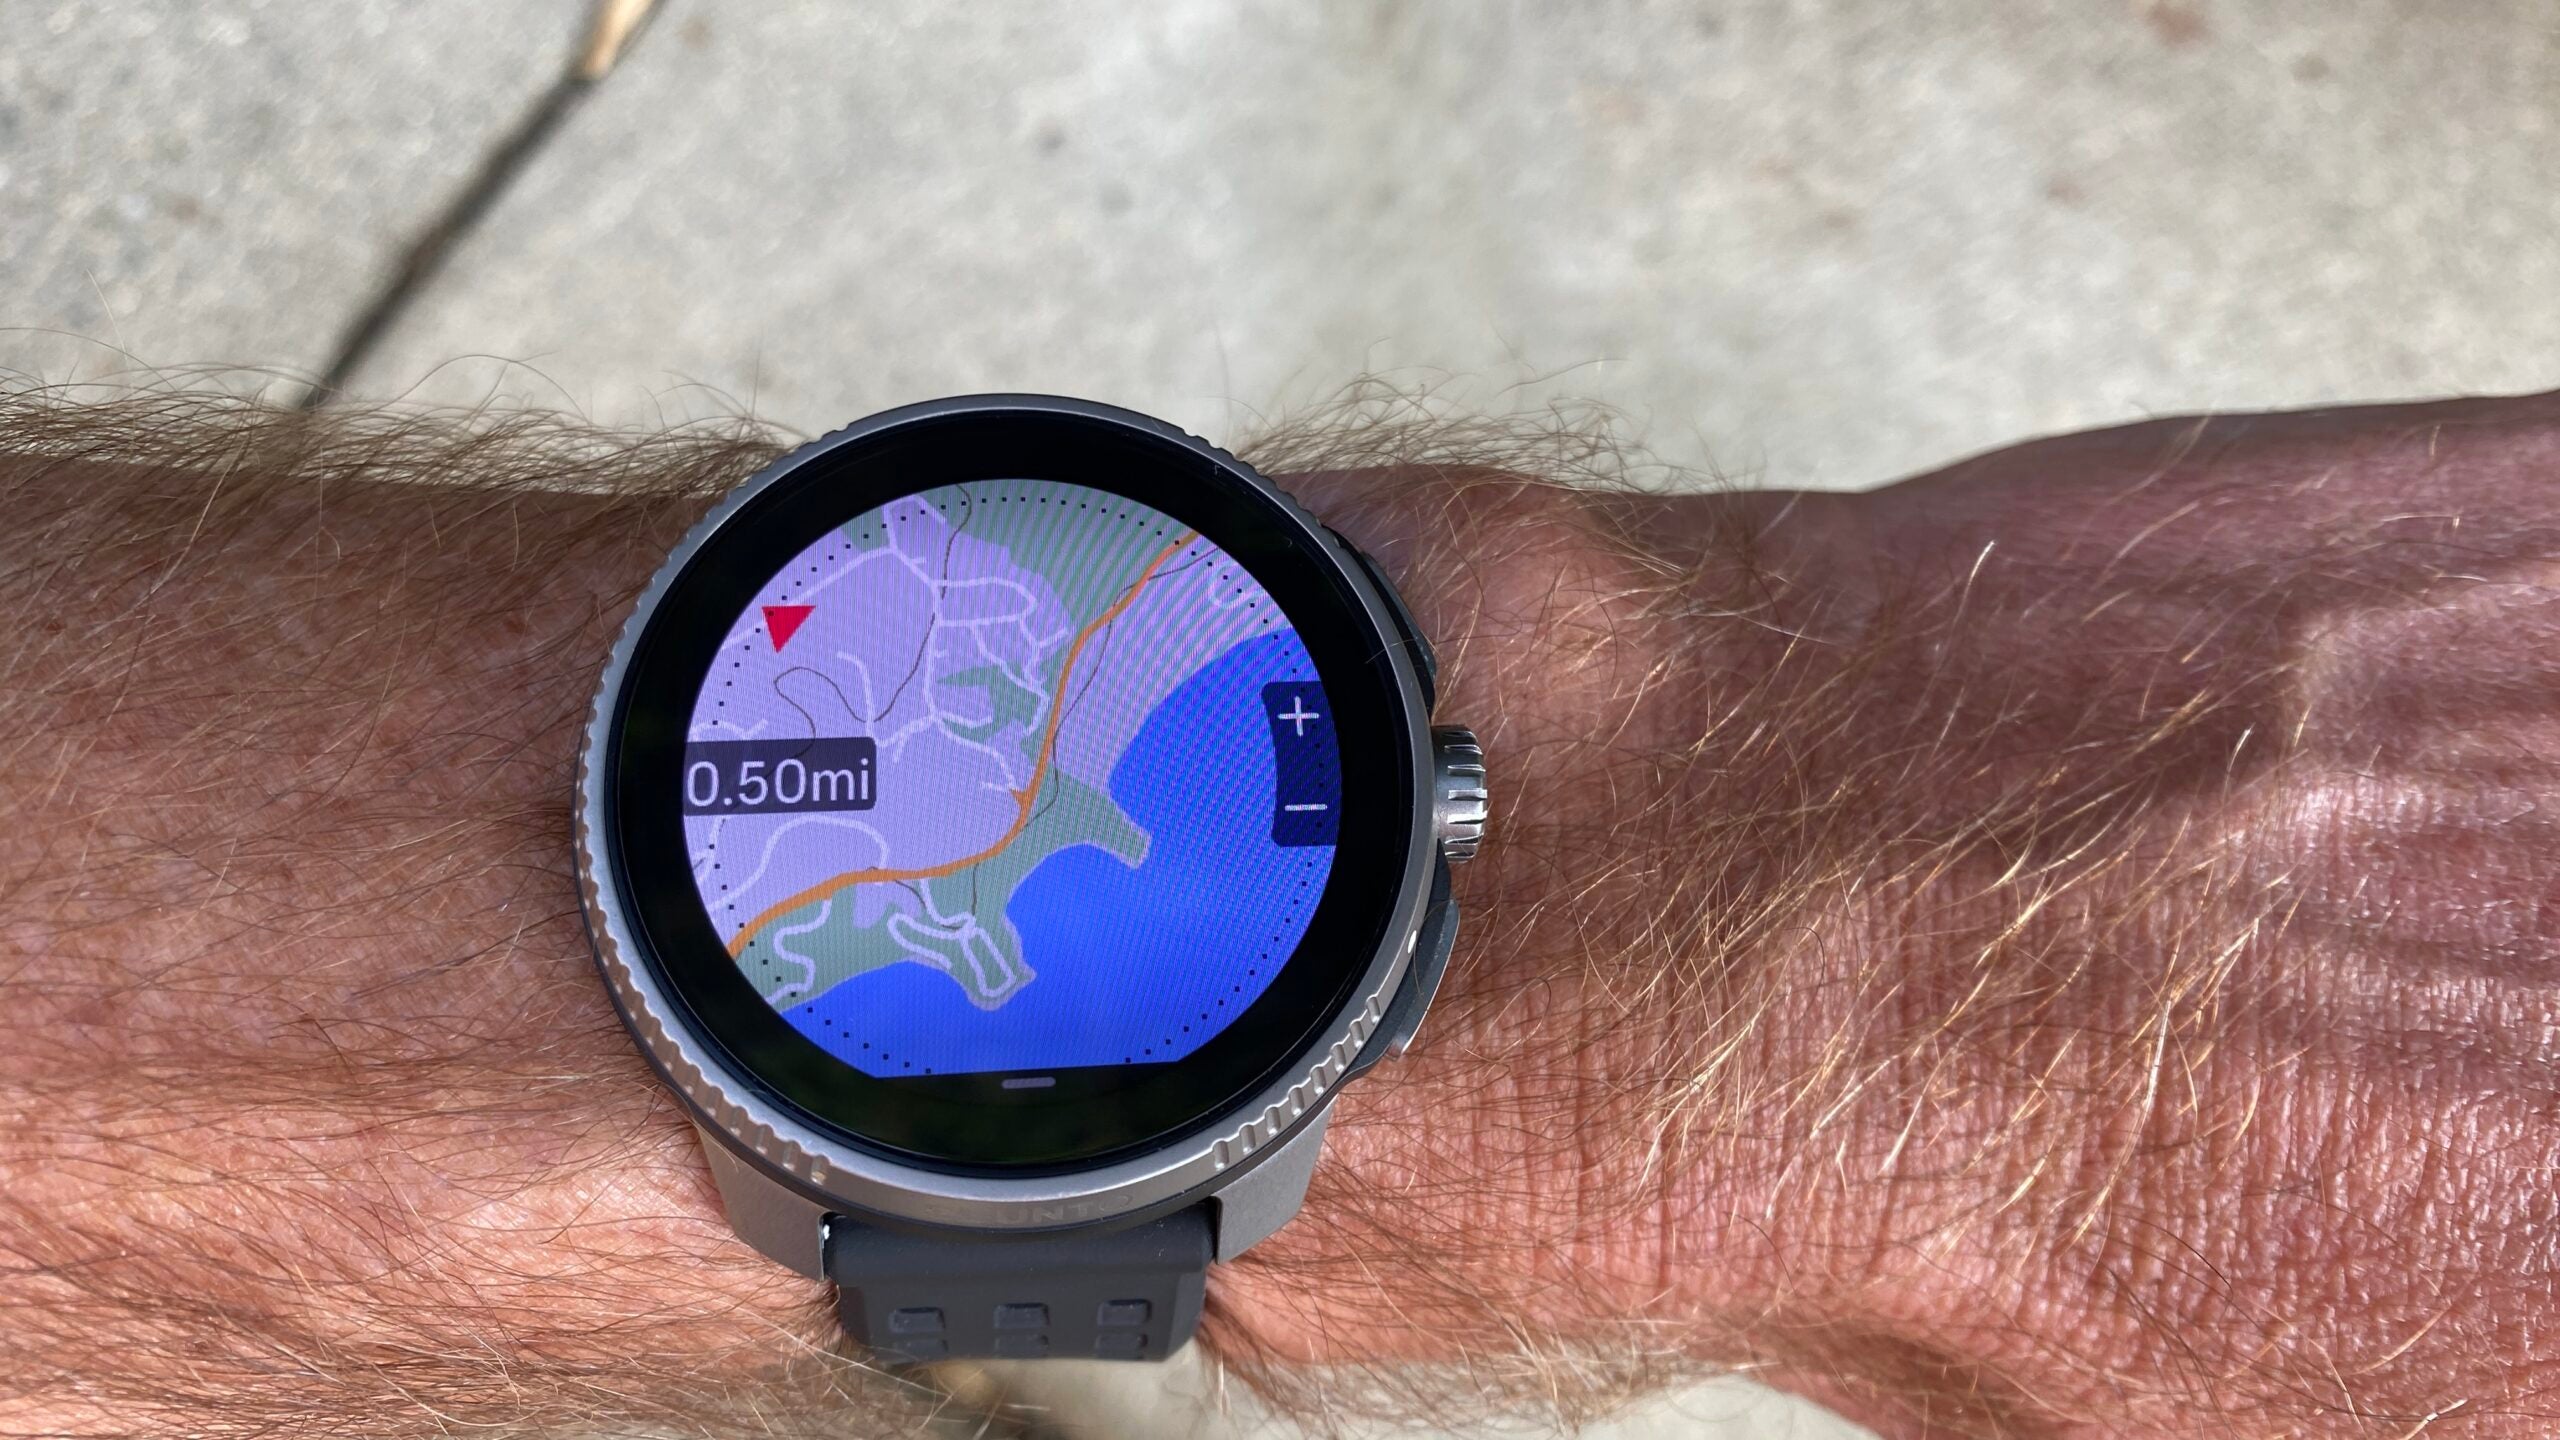 A shot of the navigation screen of the Suunto Race reviewed for our smartwatch readers